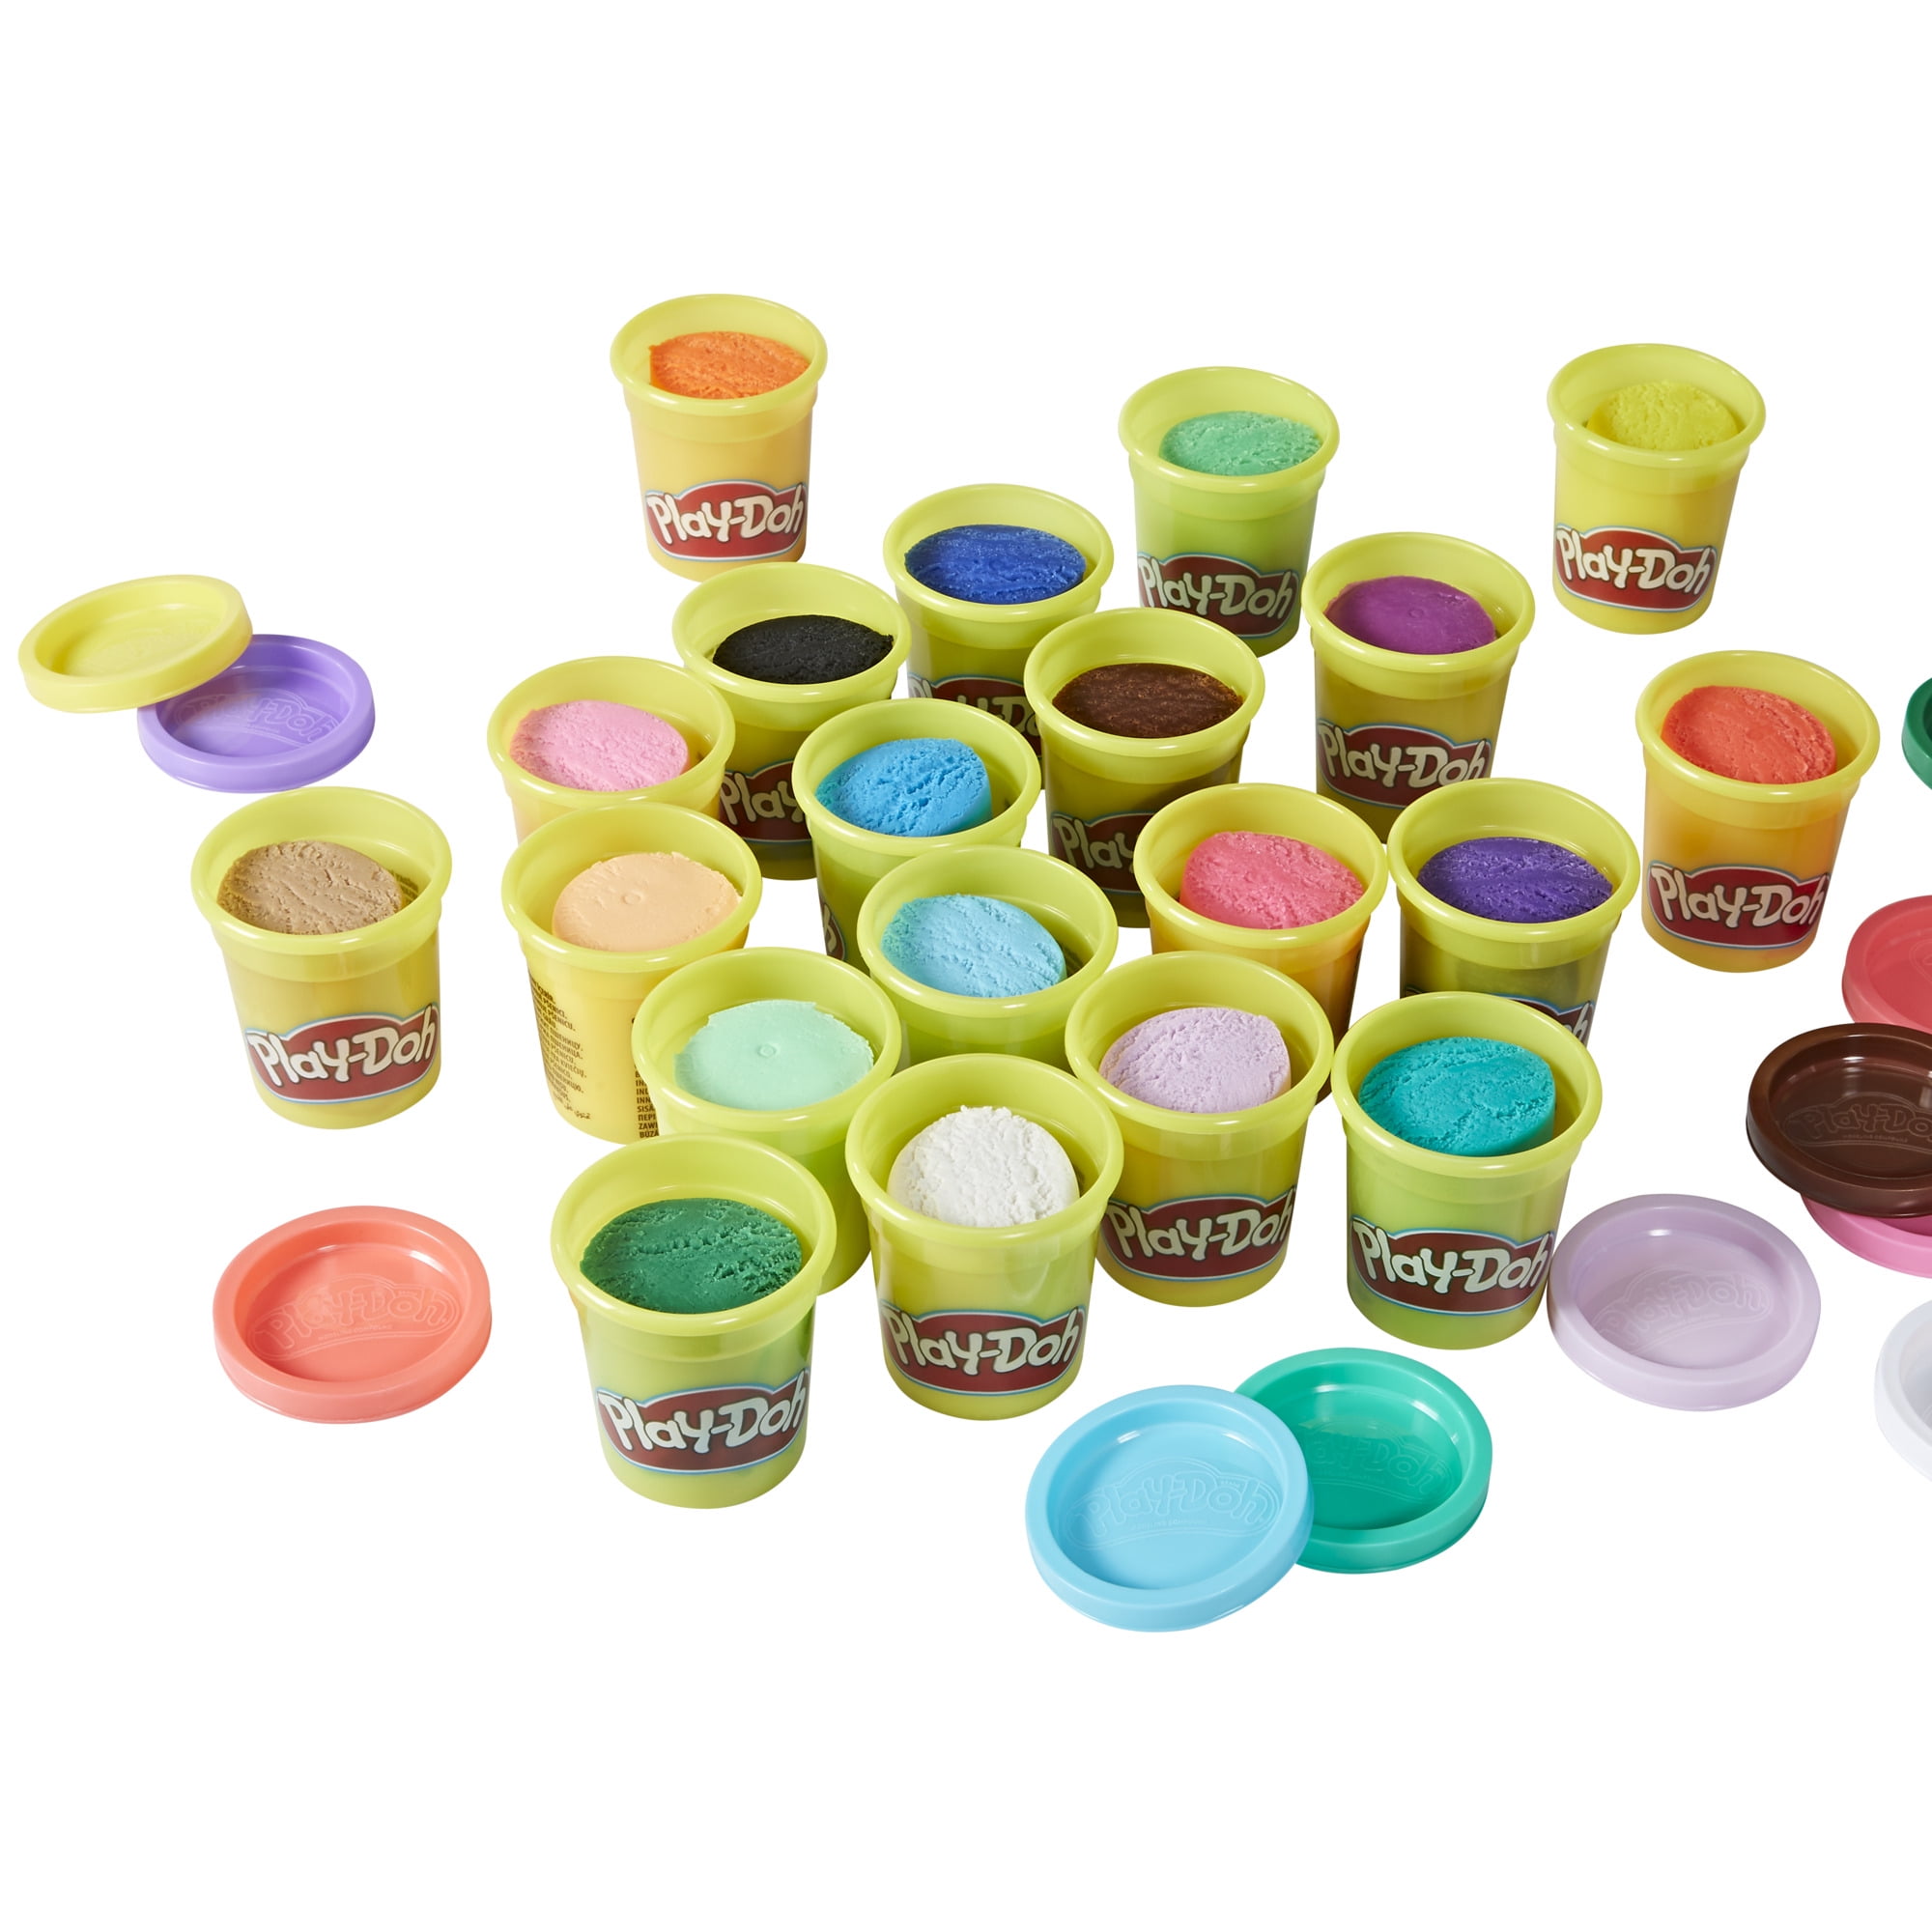 New Sealed Play-Doh 20 Piece Set with Tools 8 dough colors 20+